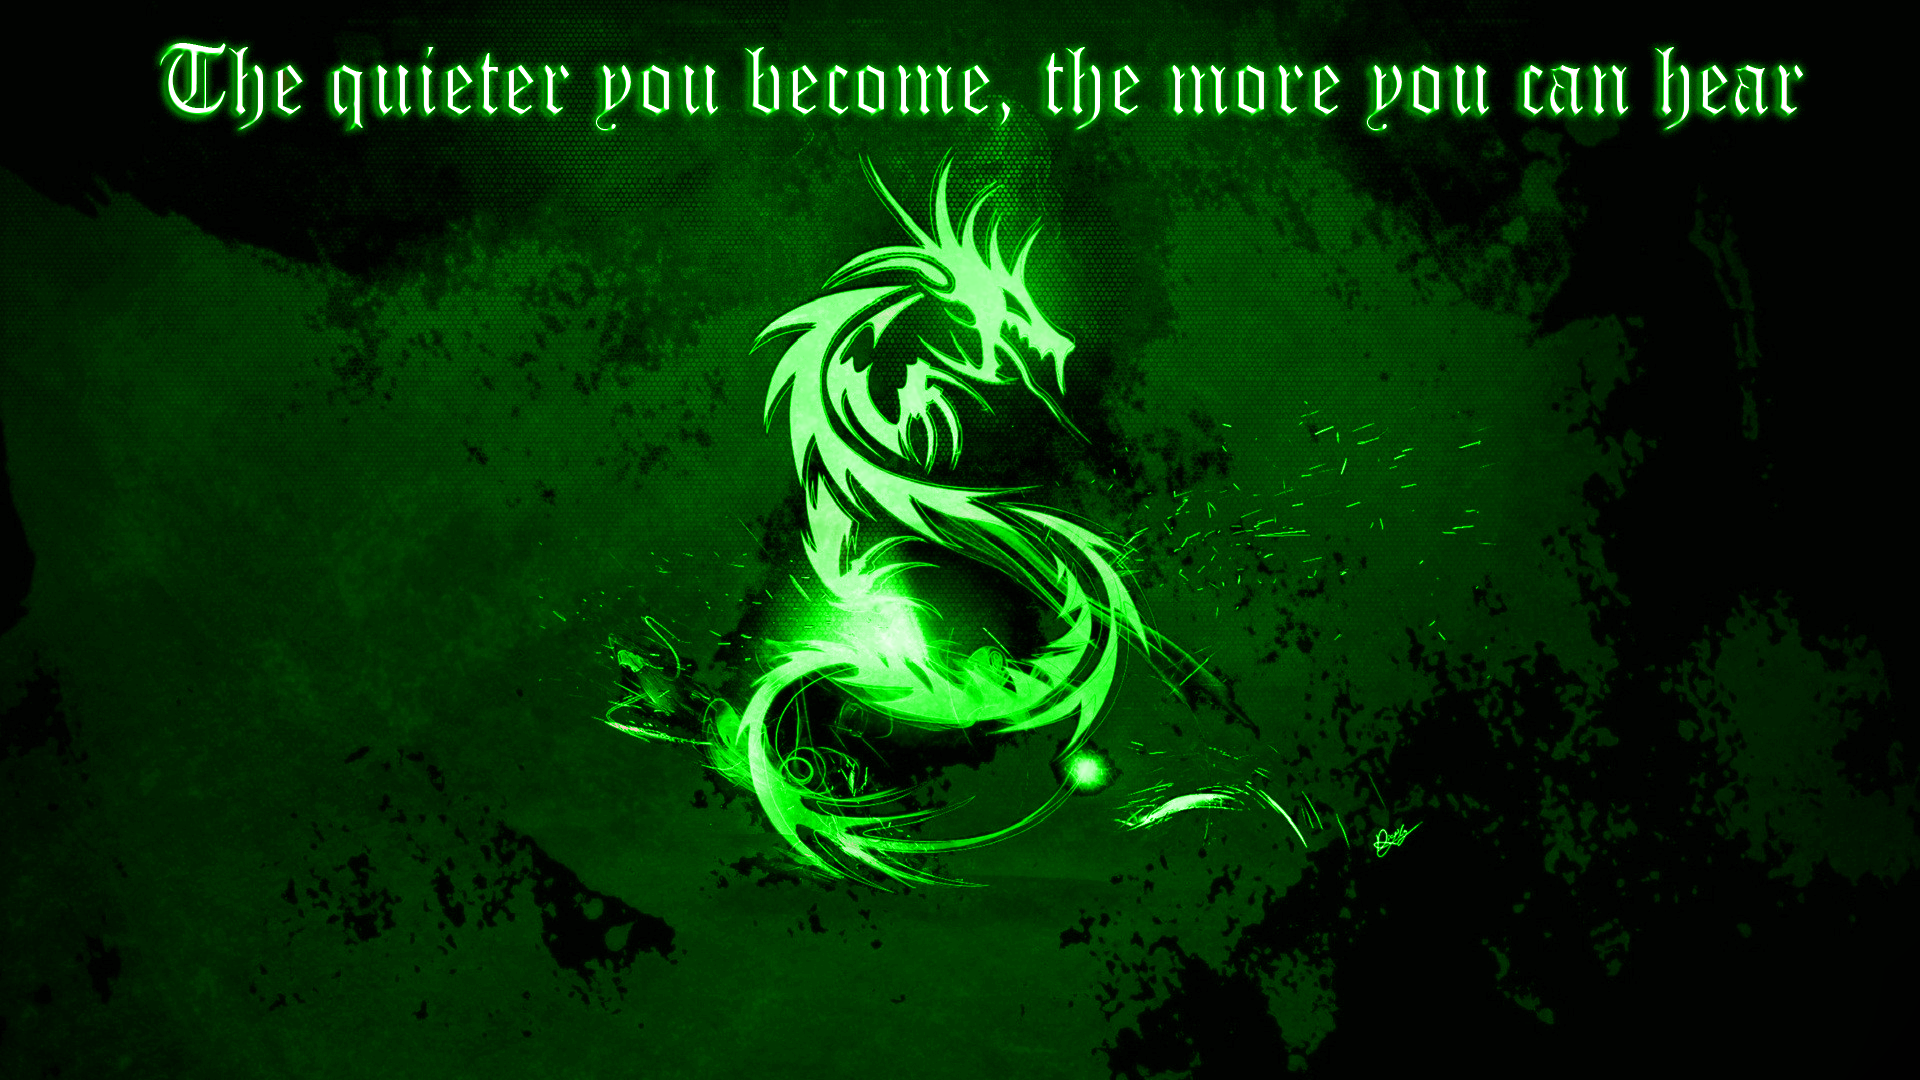 General 1920x1080 dragon quote typography Kali Linux NetHunter hacking green background